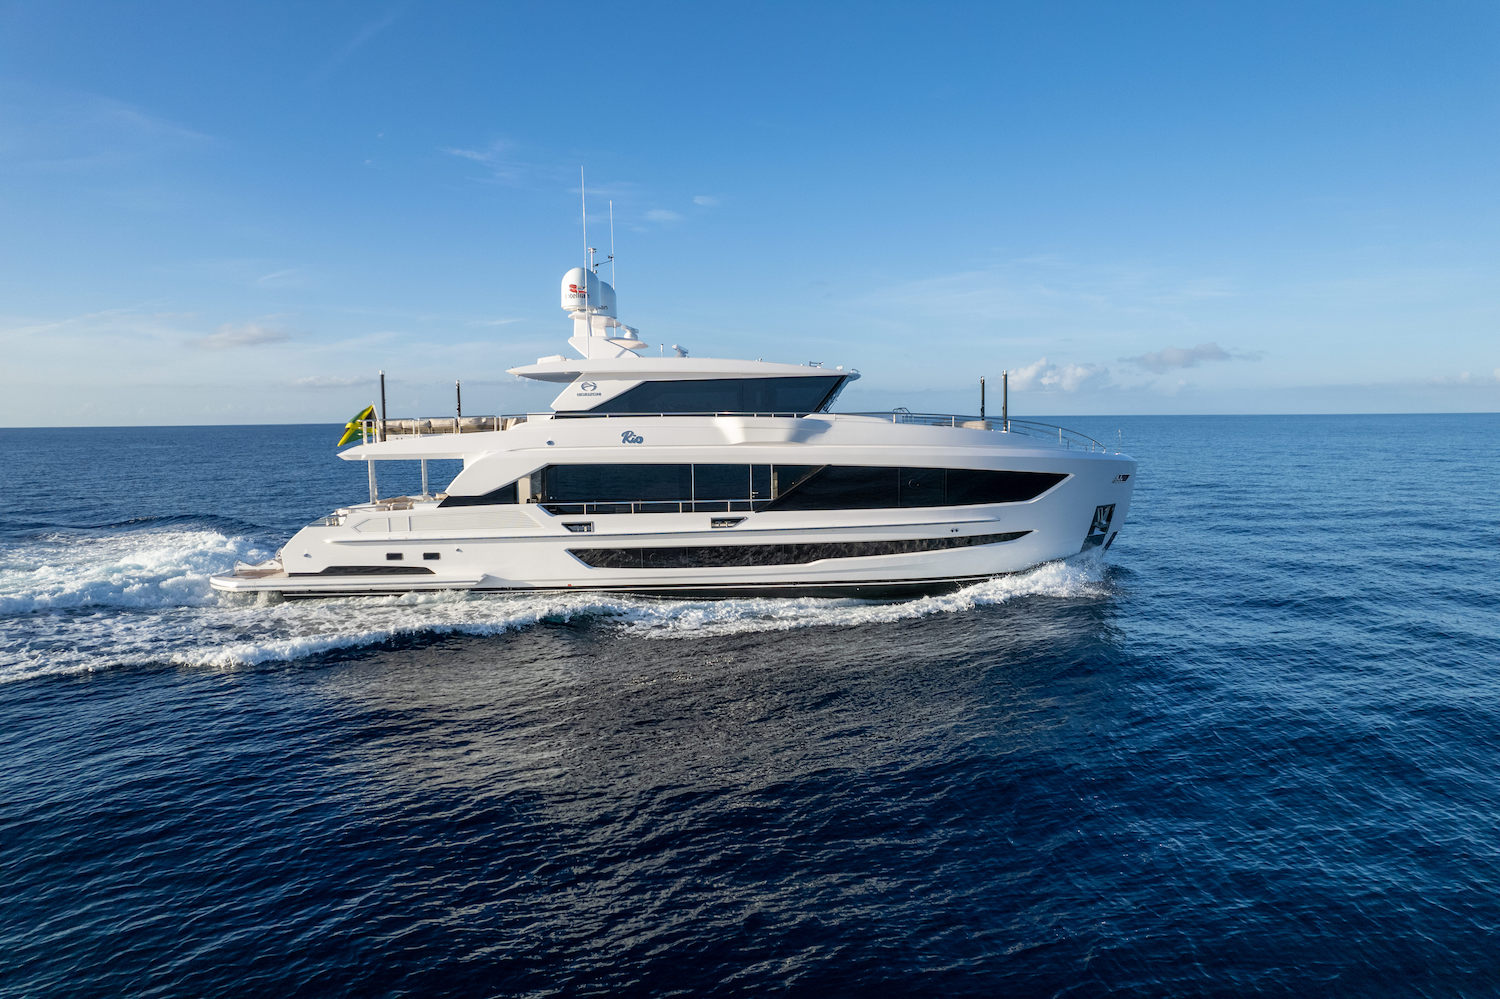 Profile Of The Motor Yacht RIO